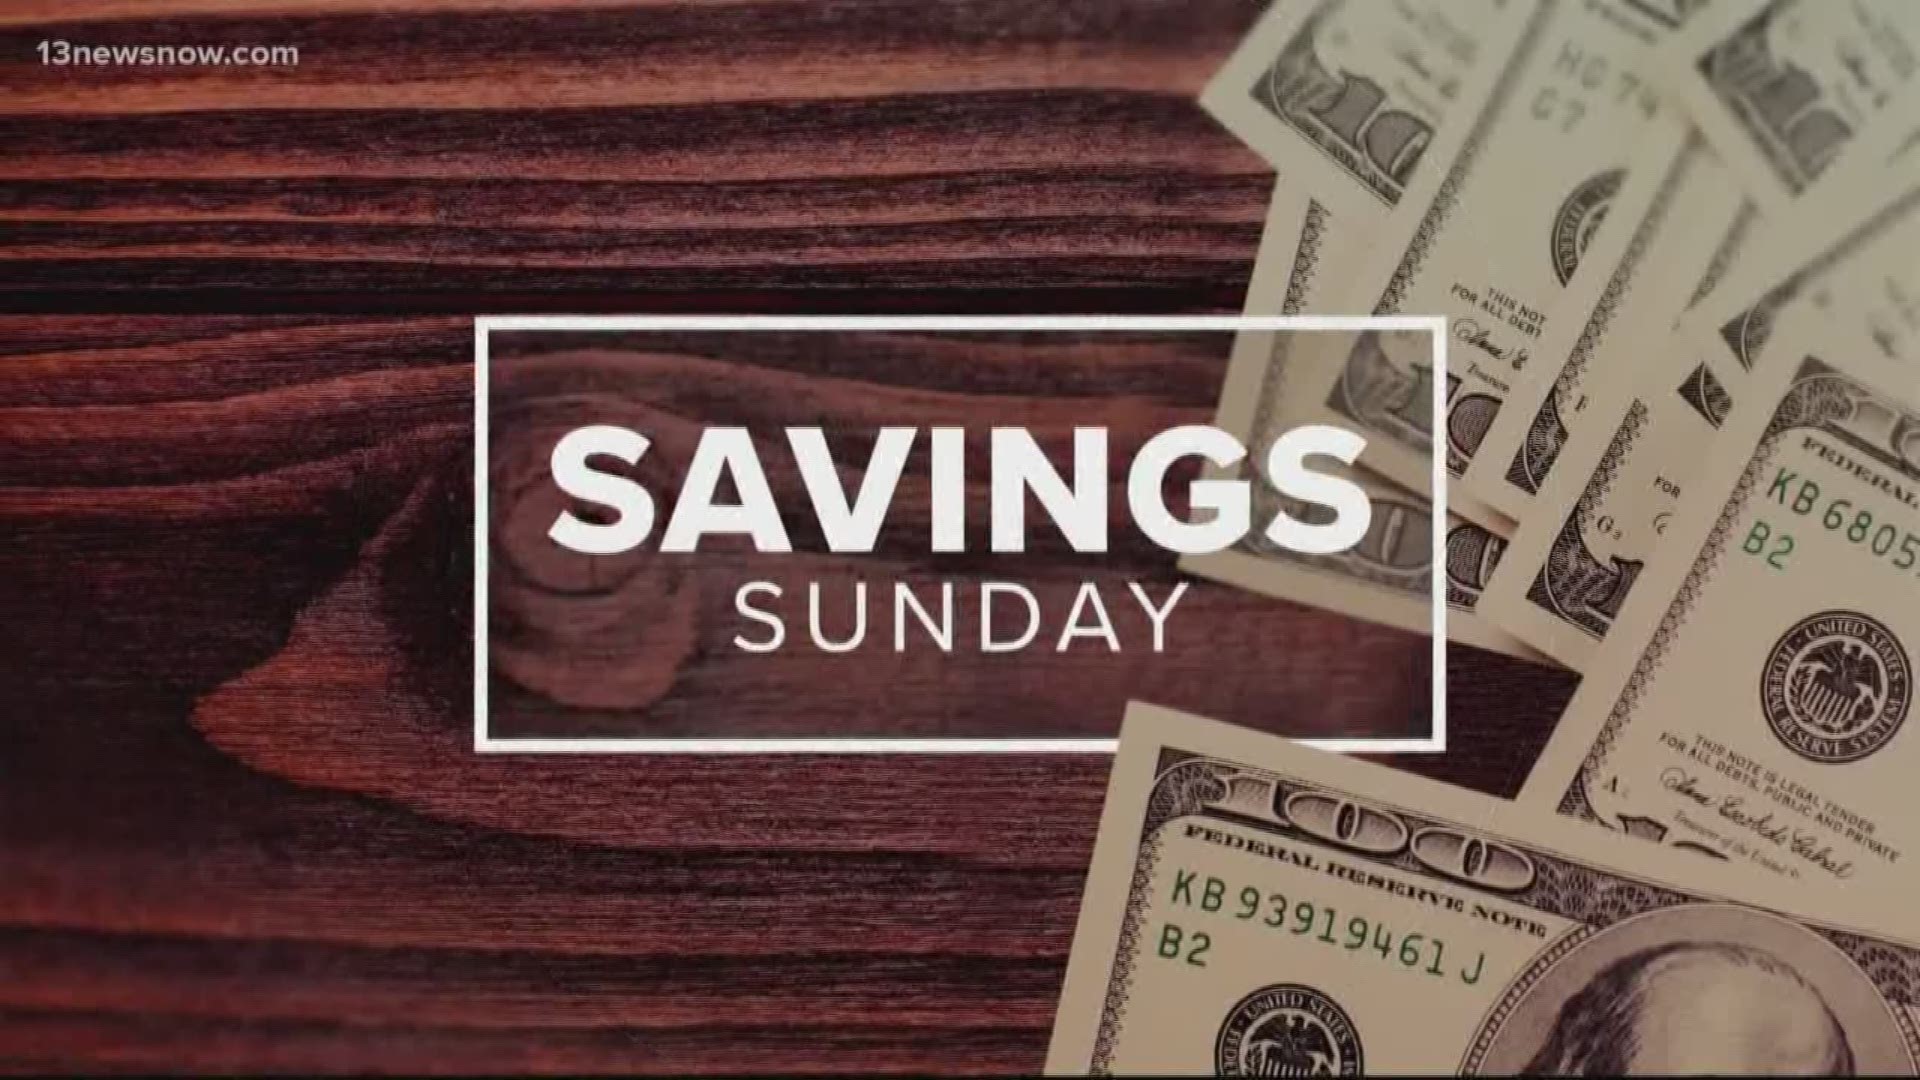 Laura Oliver from www.afrugalchick.com has your big savings for the week of Aug. 11, 2019.